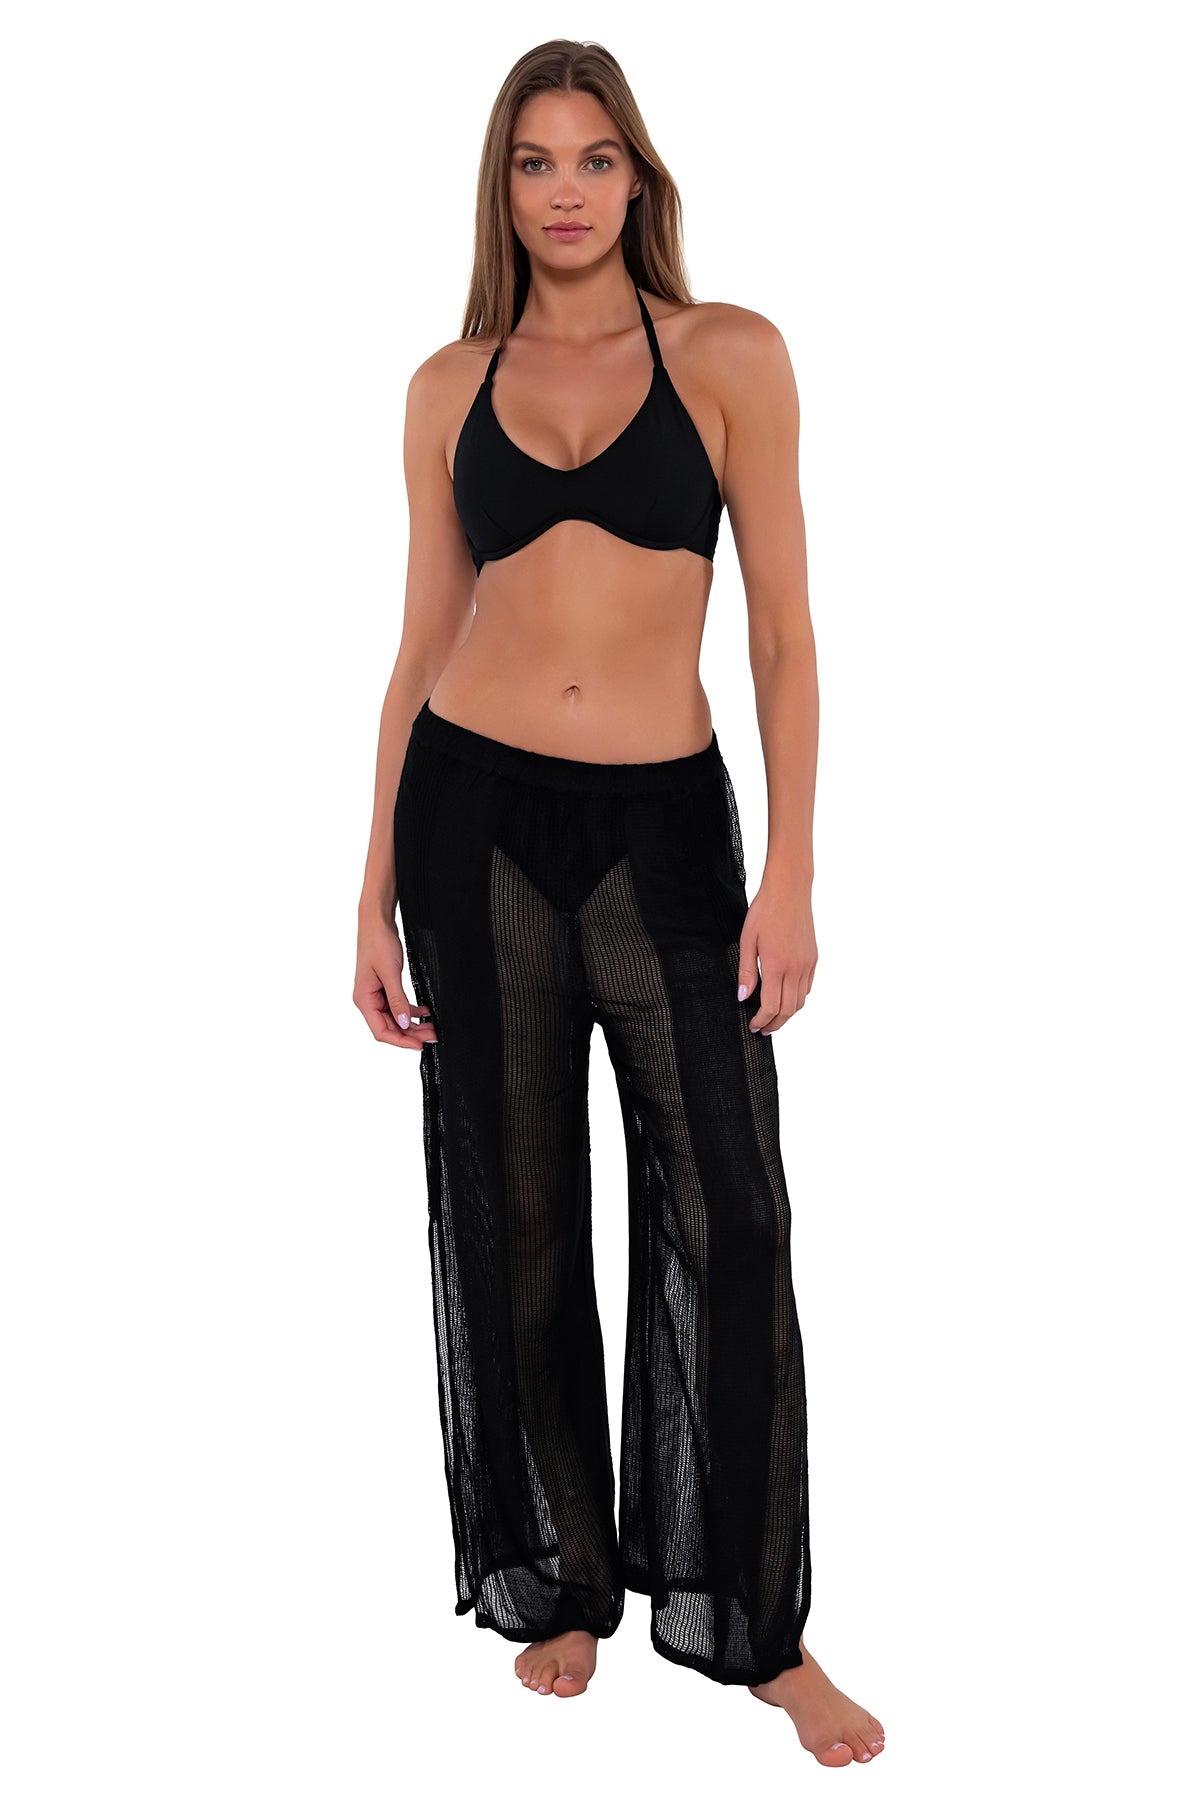 Front pose #1 of Daria wearing Sunsets Black Breezy Beach Pant with matching Brooke U-Wire bikini top